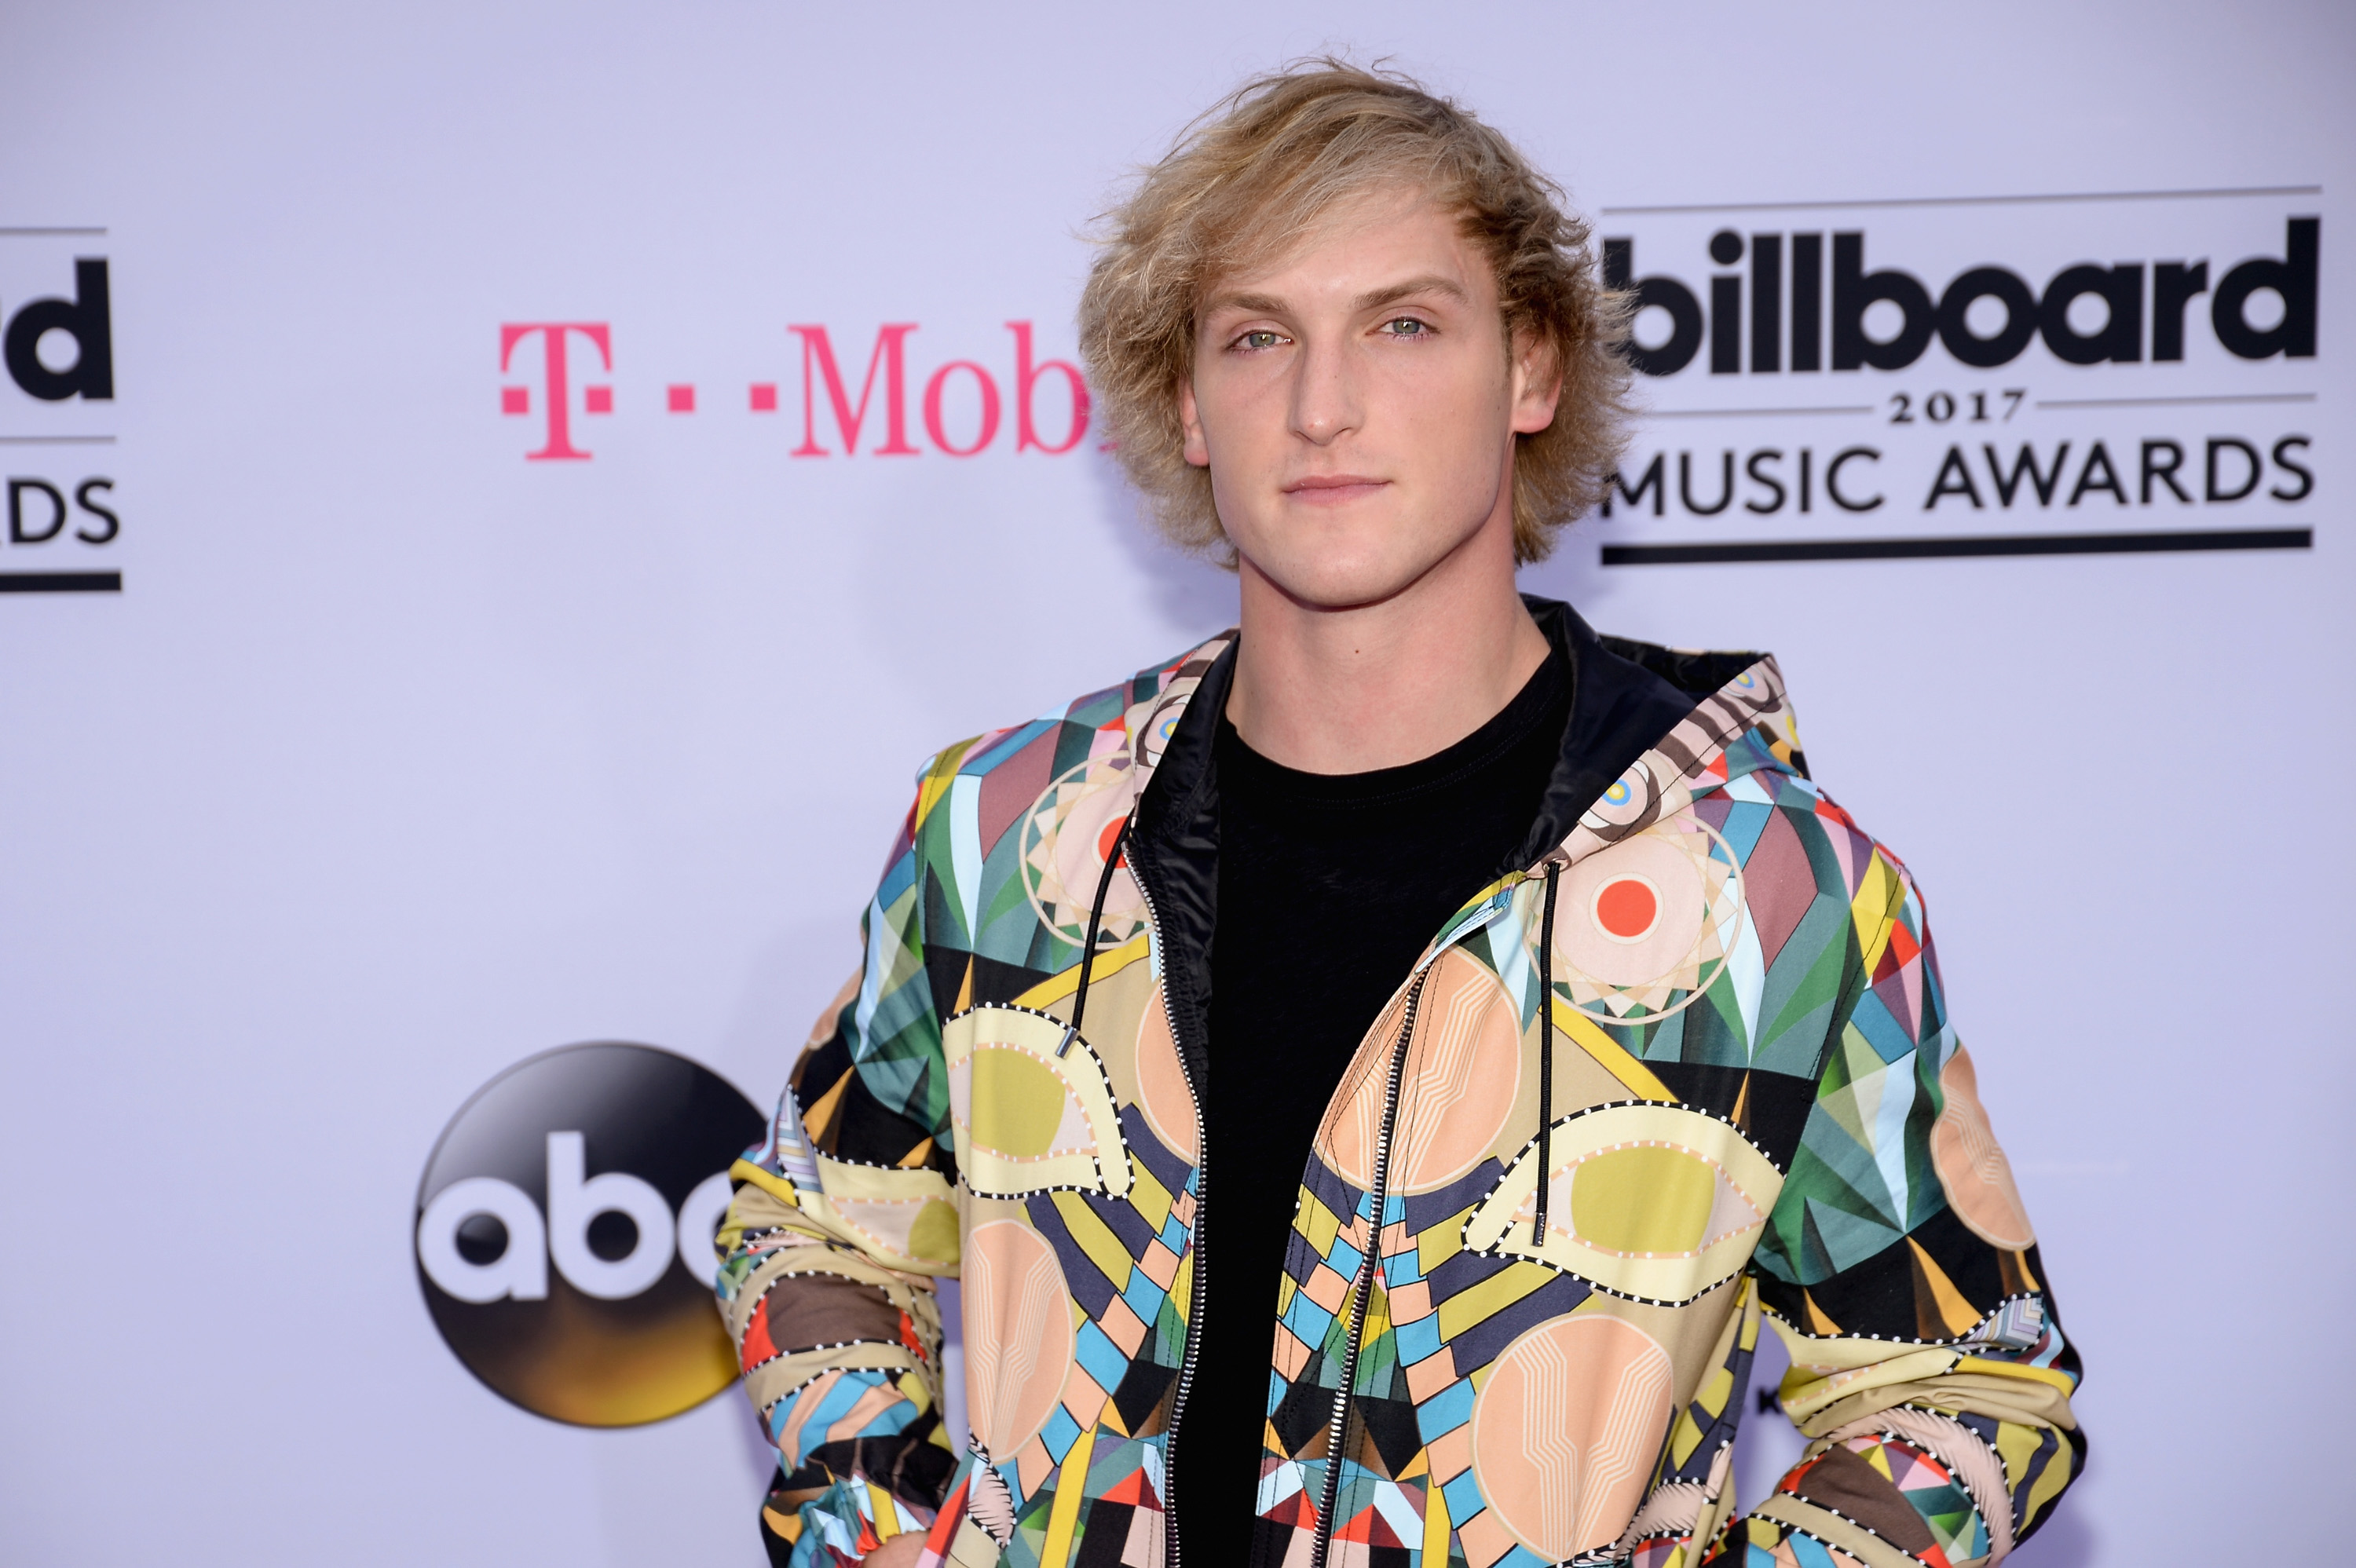 YouTube Just Suspended Ads on Logan Paul's Videos. Here's How Much He Could Lose